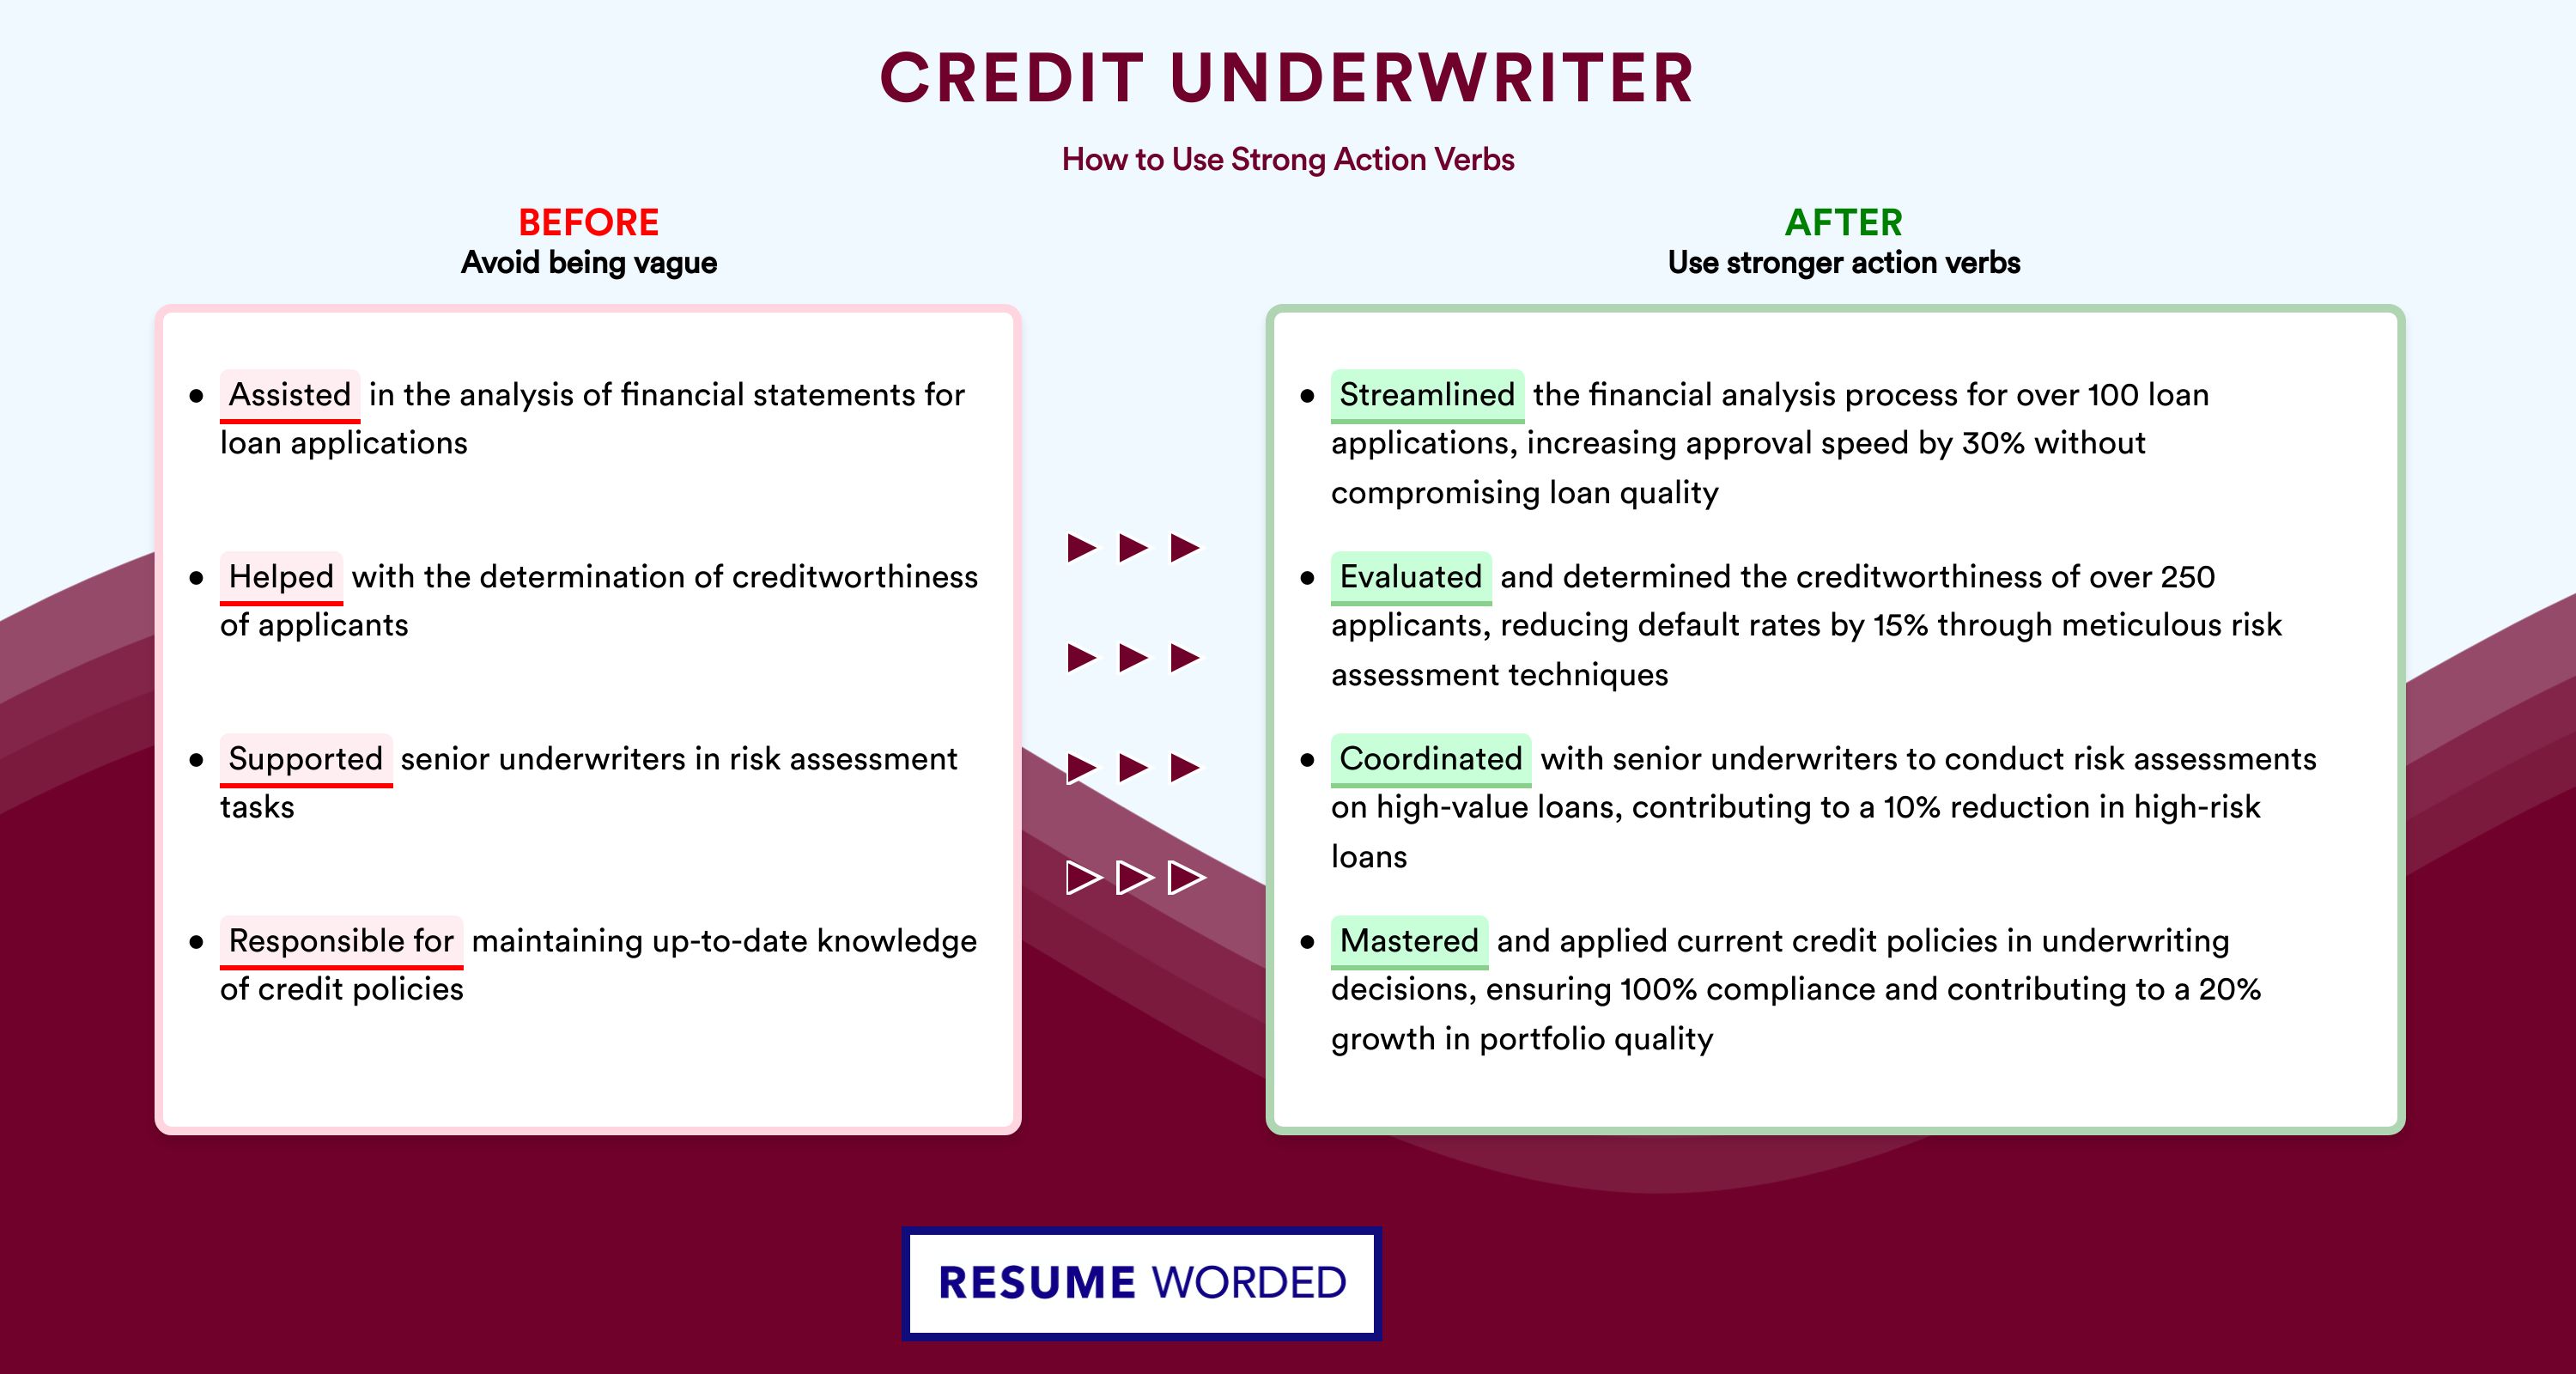 Action Verbs for Credit Underwriter